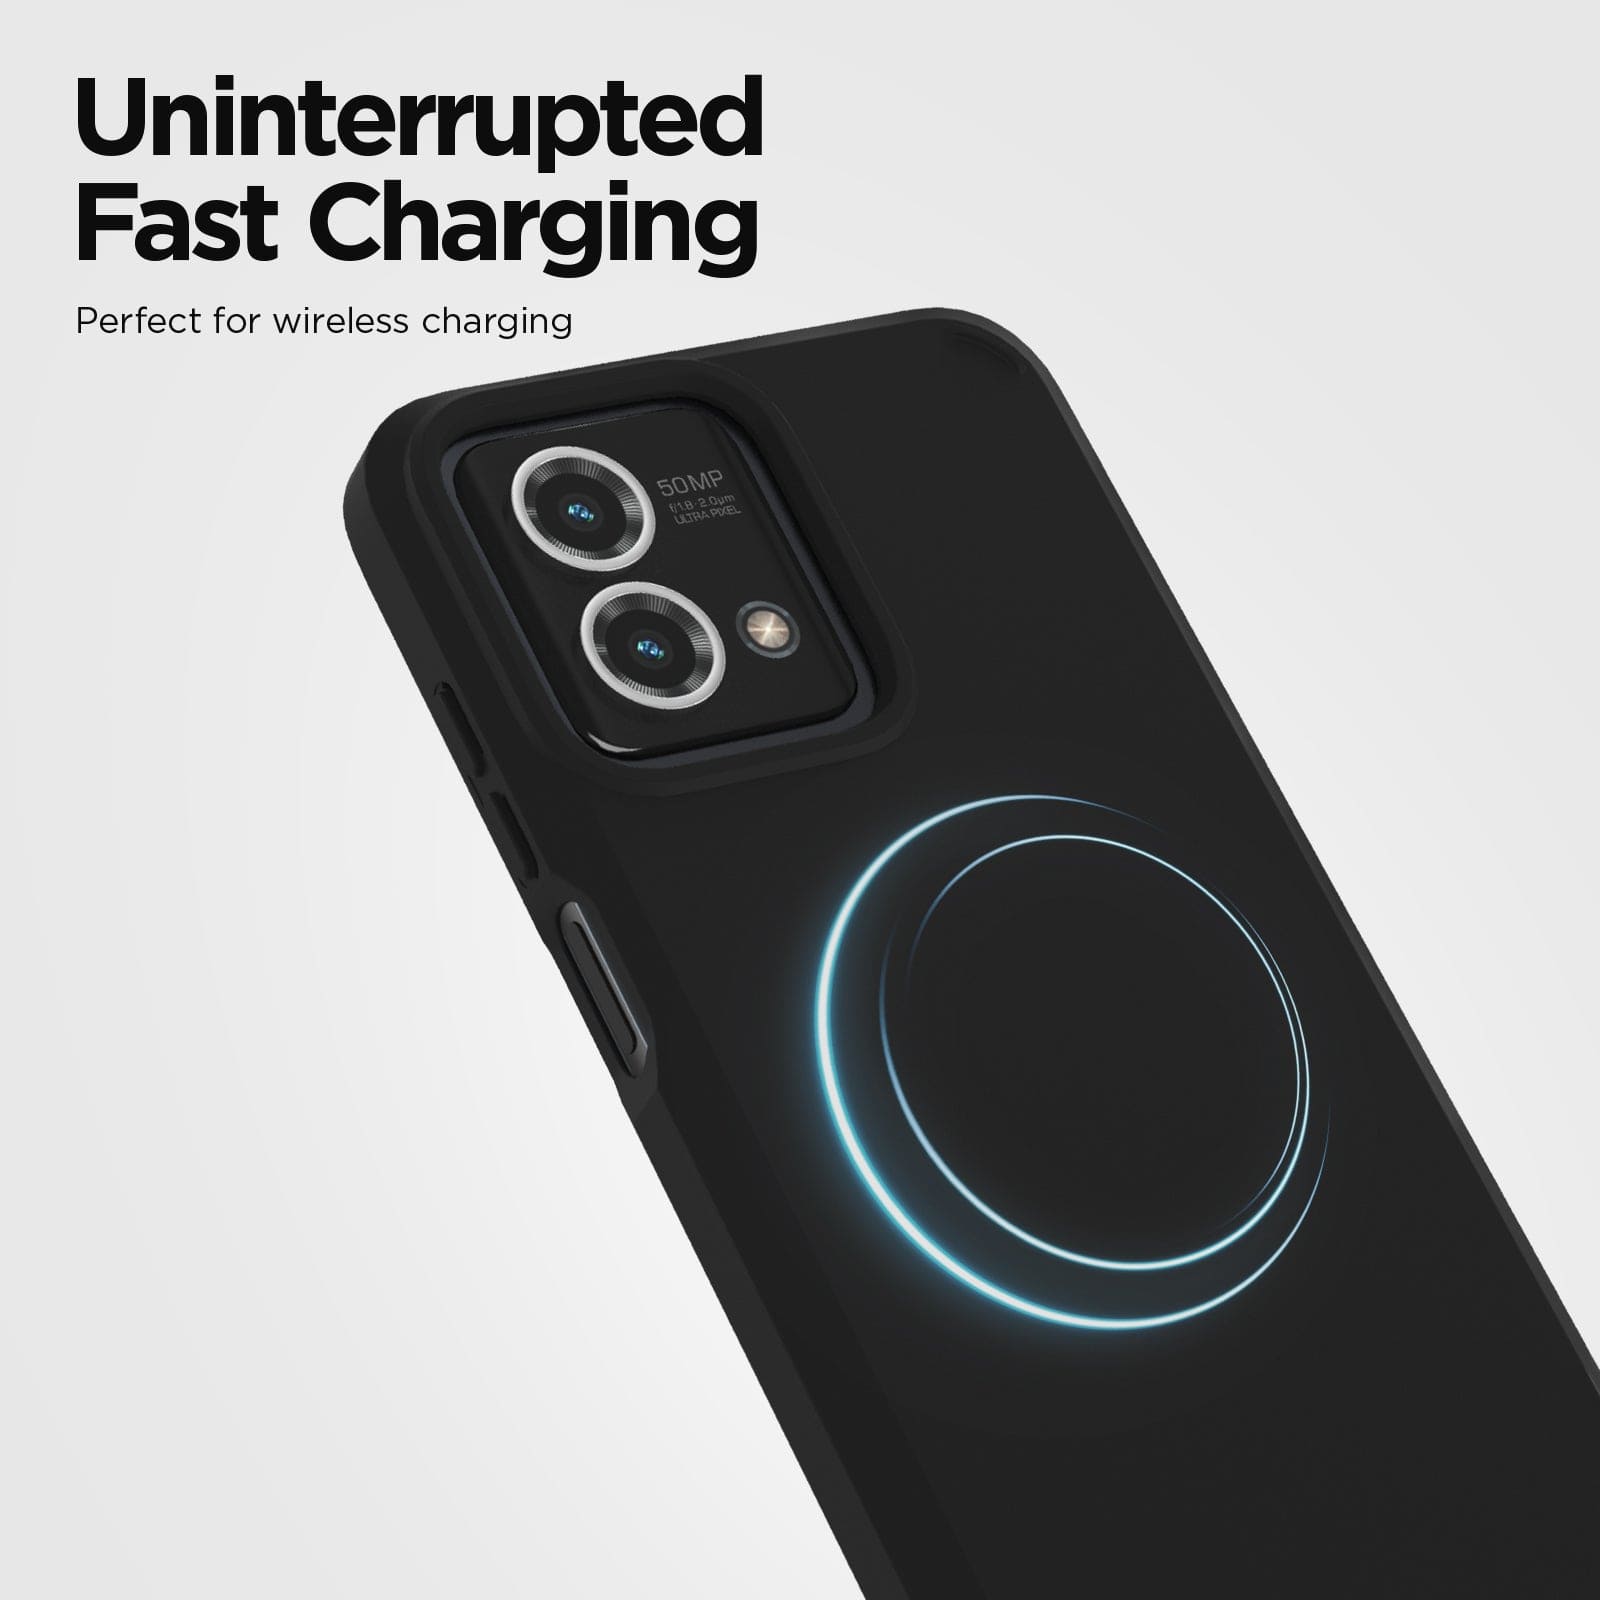 Uninterrupted Fast Charging. Perfect for wireless charging. 